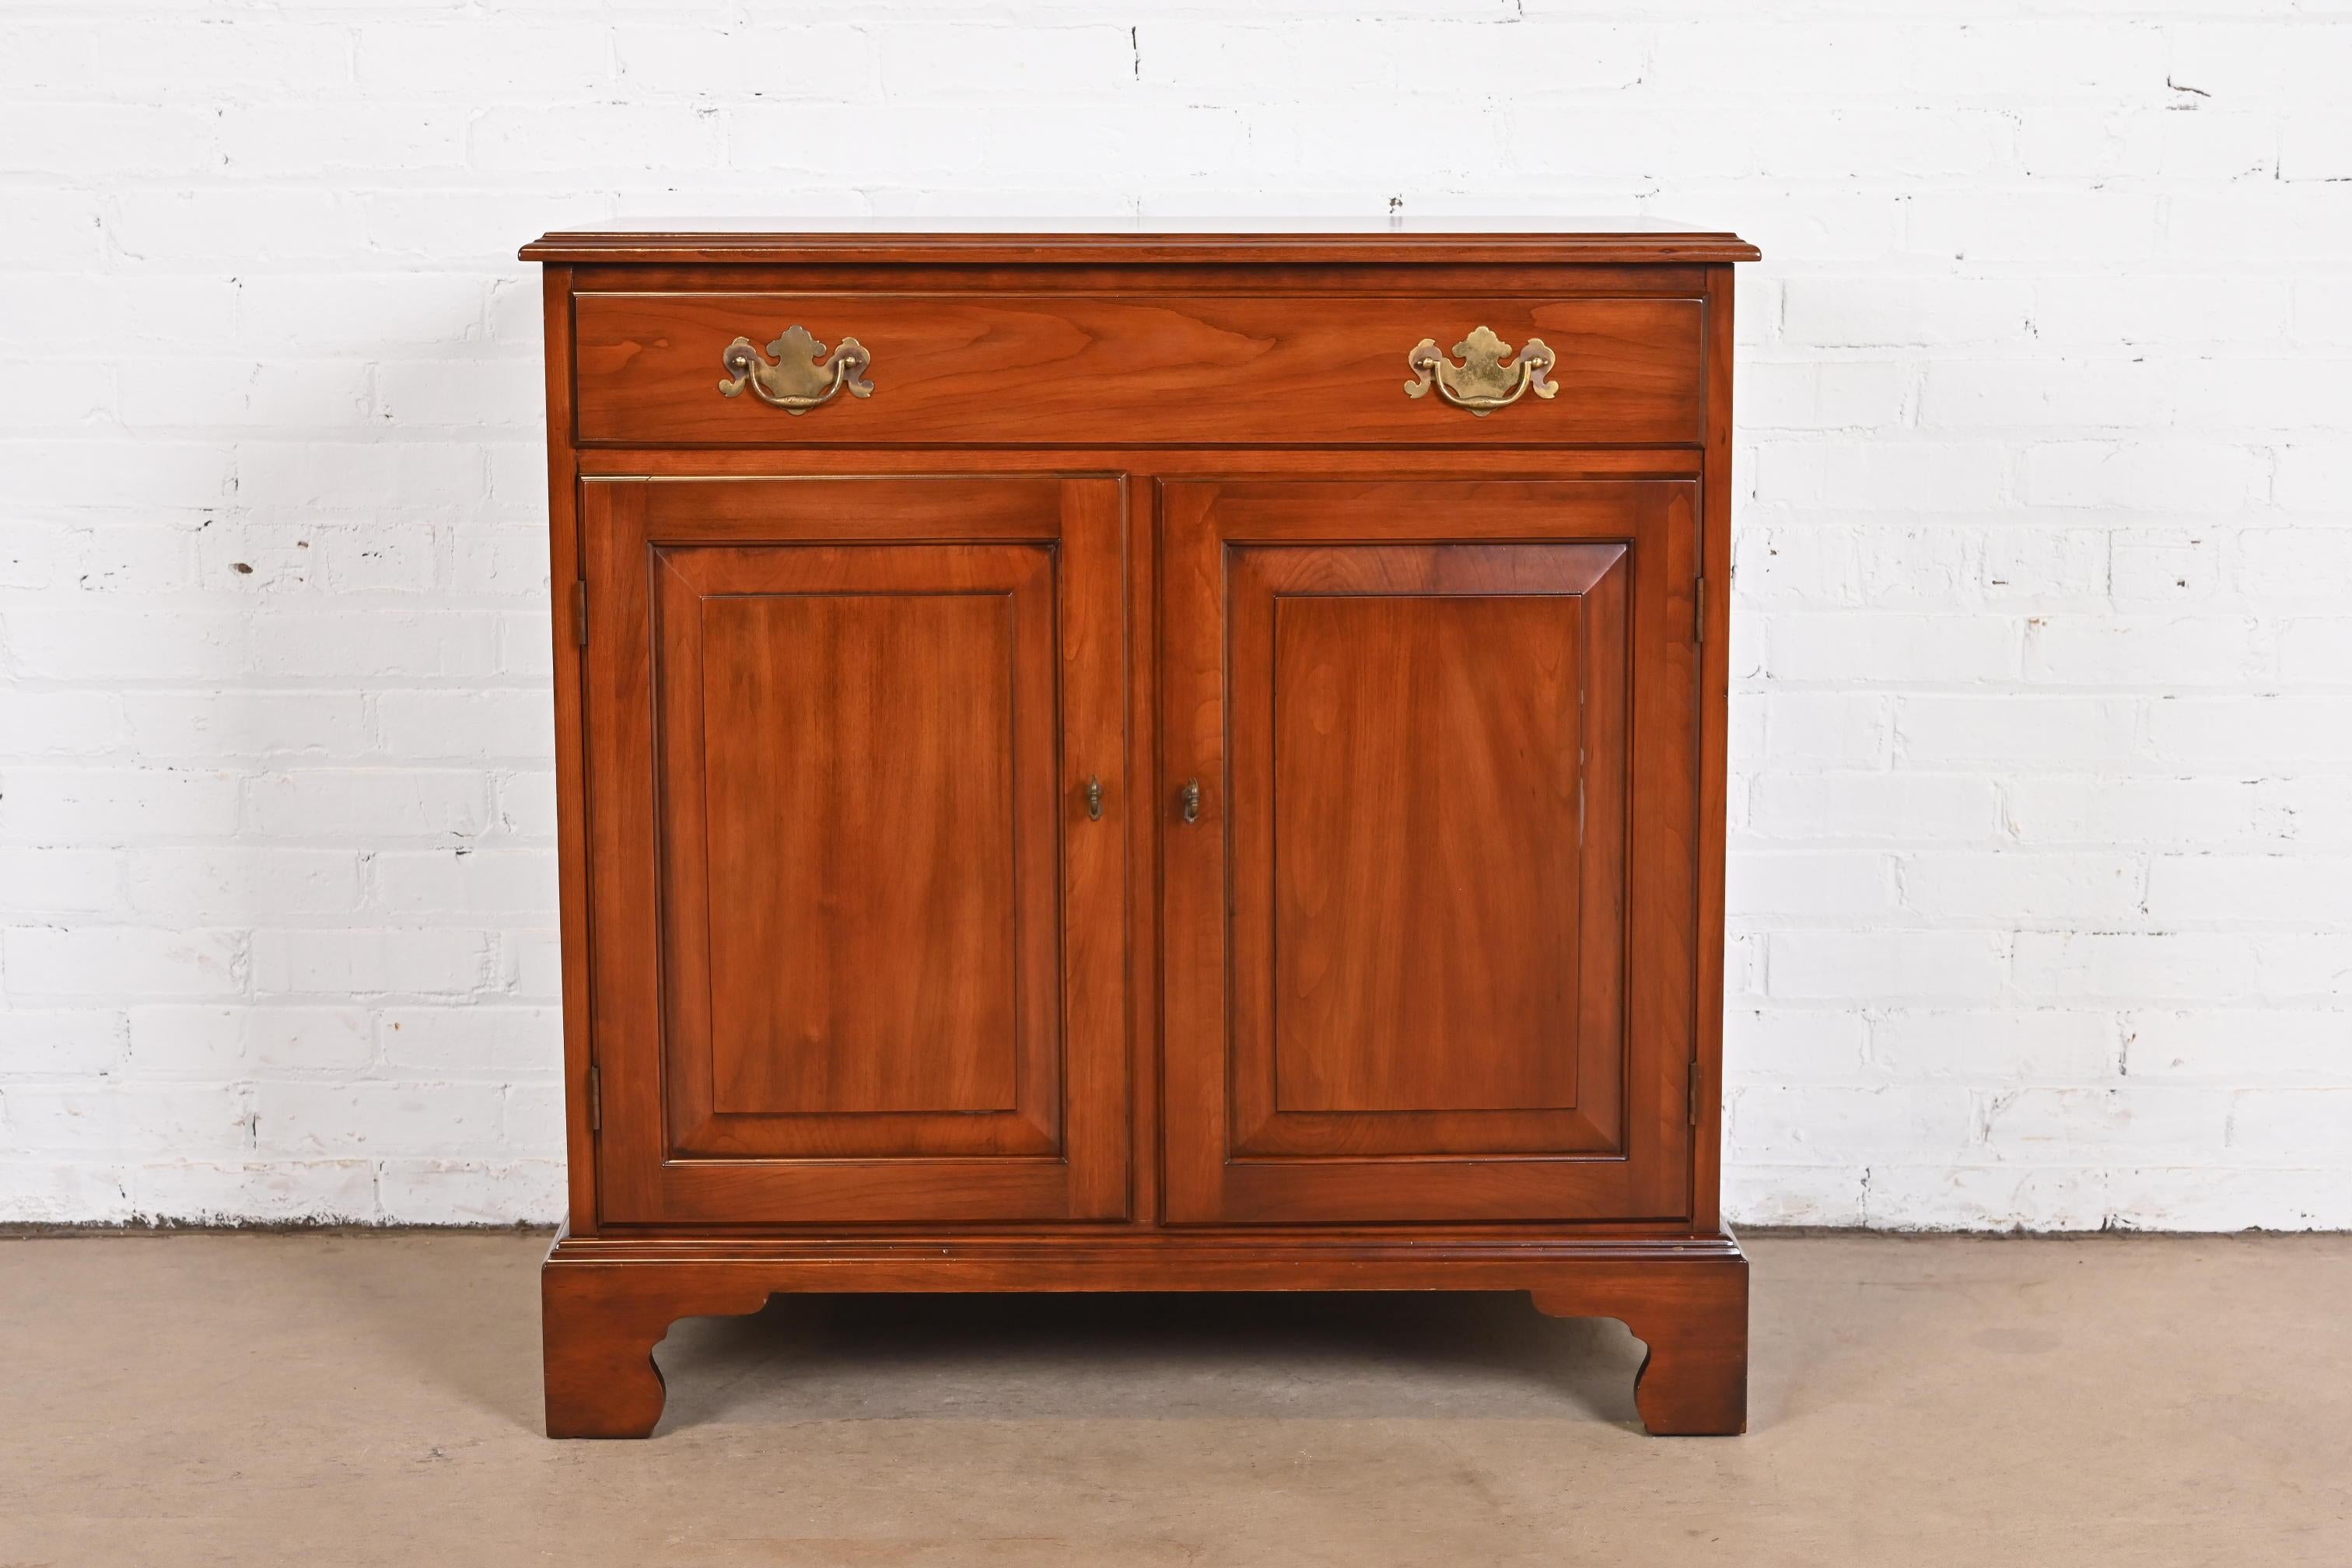 A gorgeous American Colonial or Chippendale style buffet server or bar cabinet

By Henkel Harris

USA, circa 1960s

Solid wild black cherry wood, with original brass hardware.

Measures: 34.25